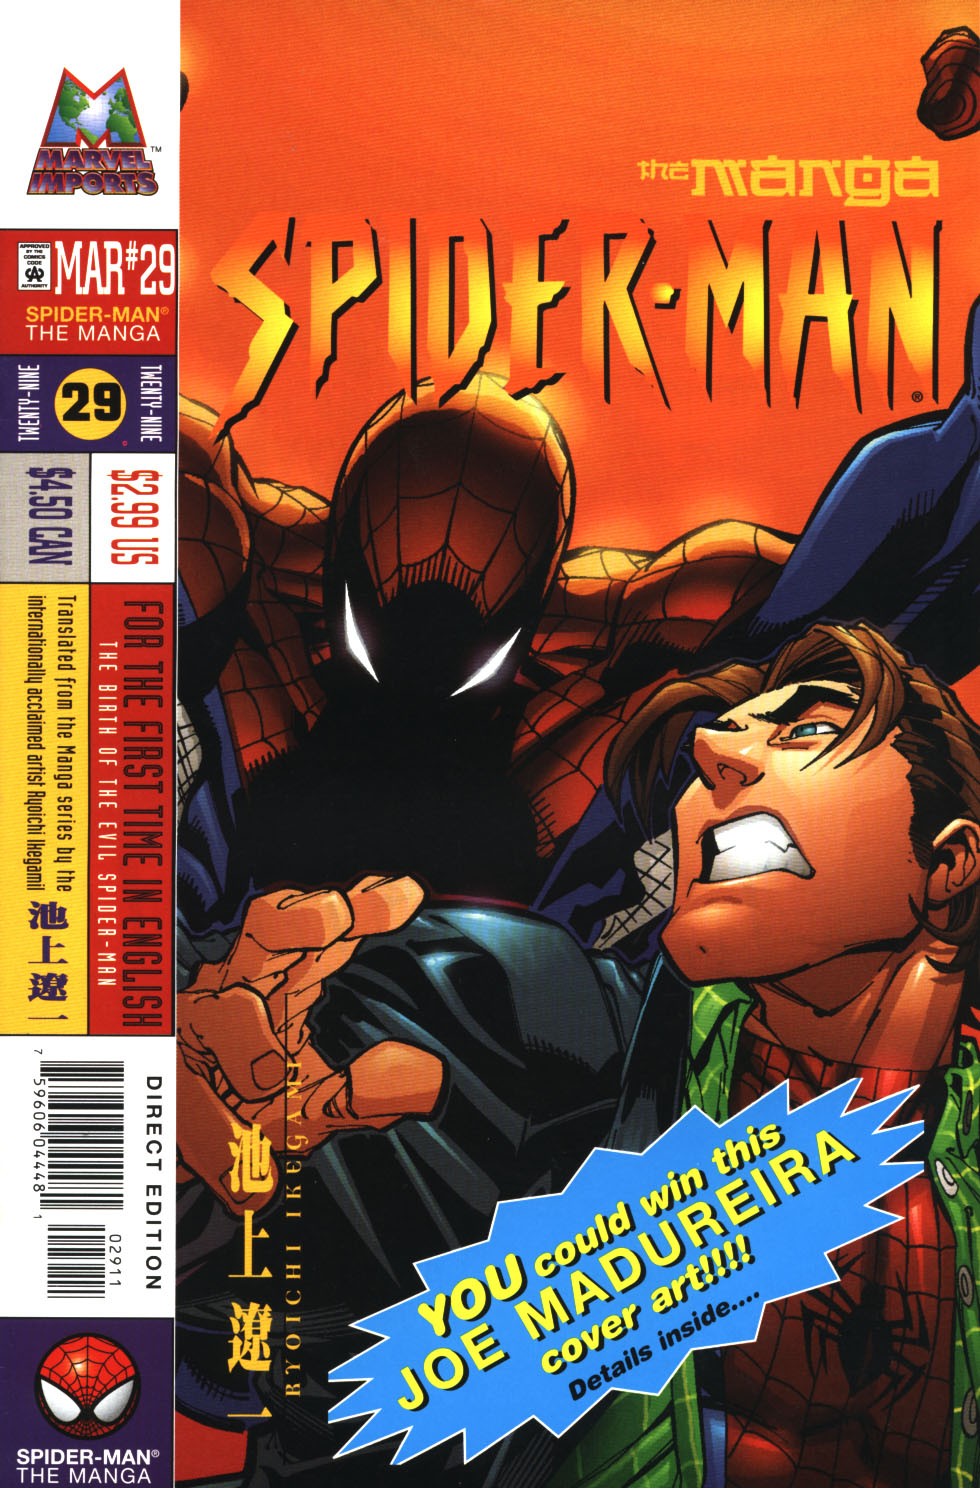 Read online Spider-Man: The Manga comic -  Issue #29 - 1